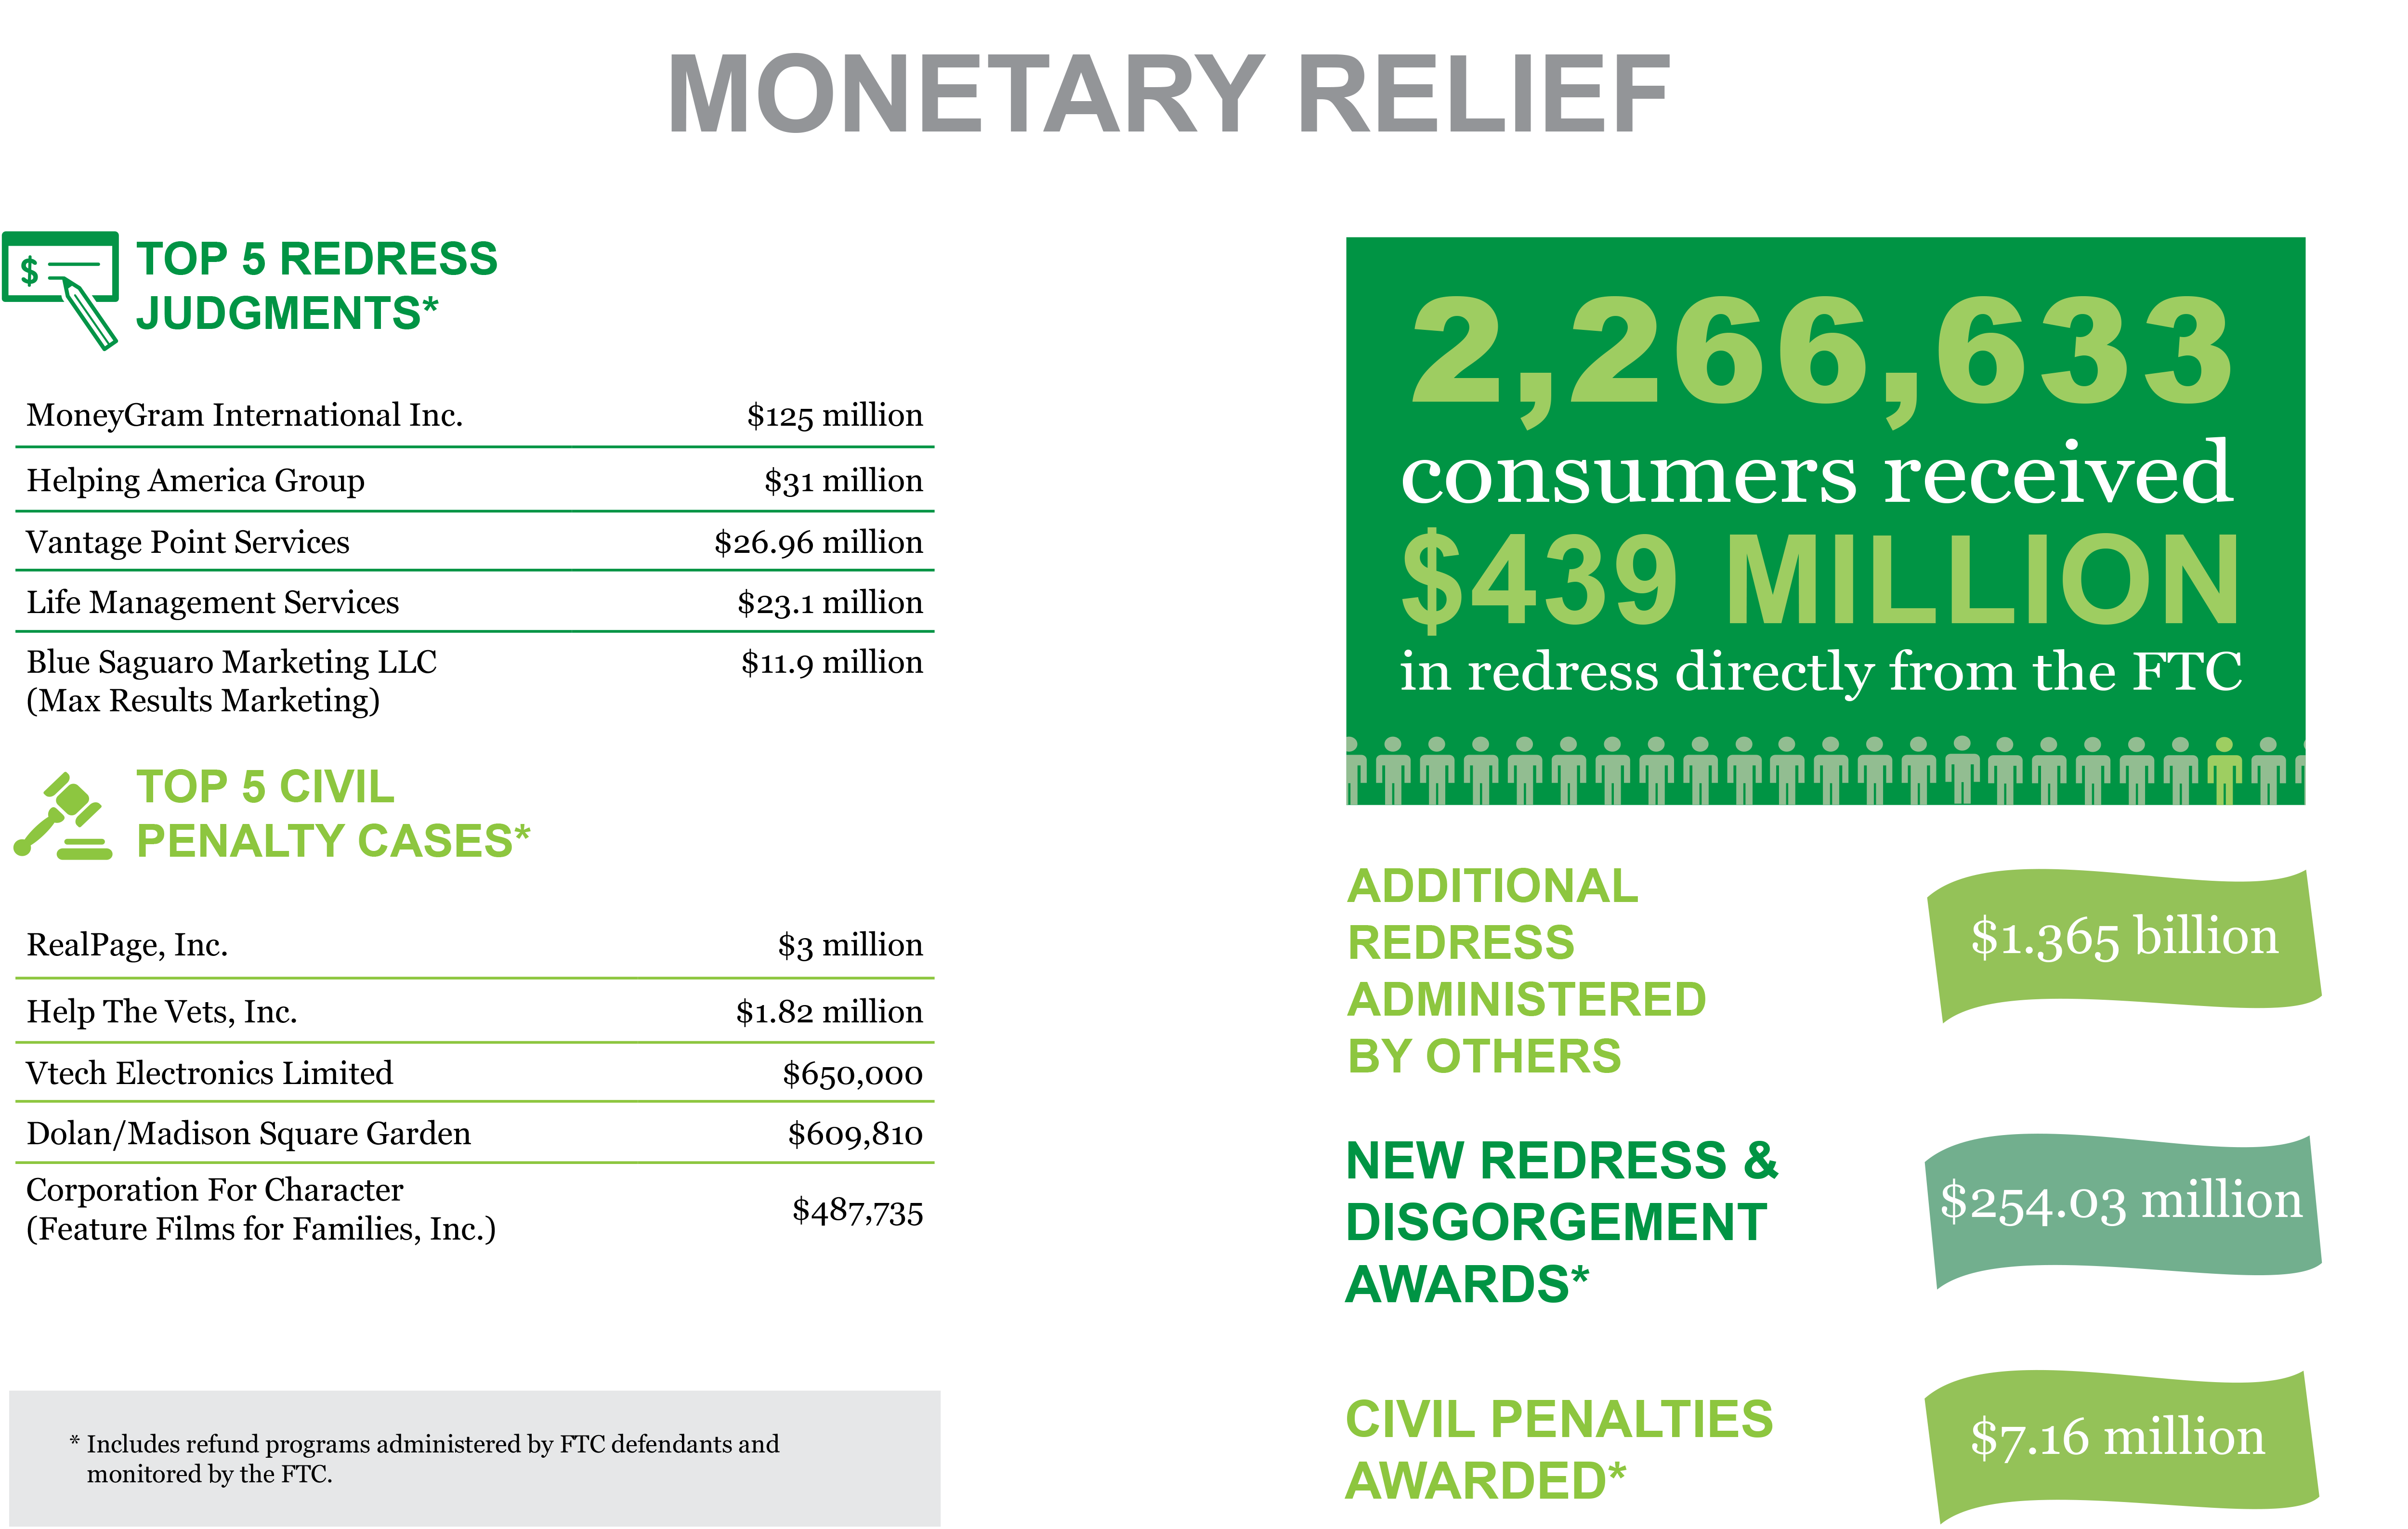 Stats & Data 2018 Monetary Relief infographic